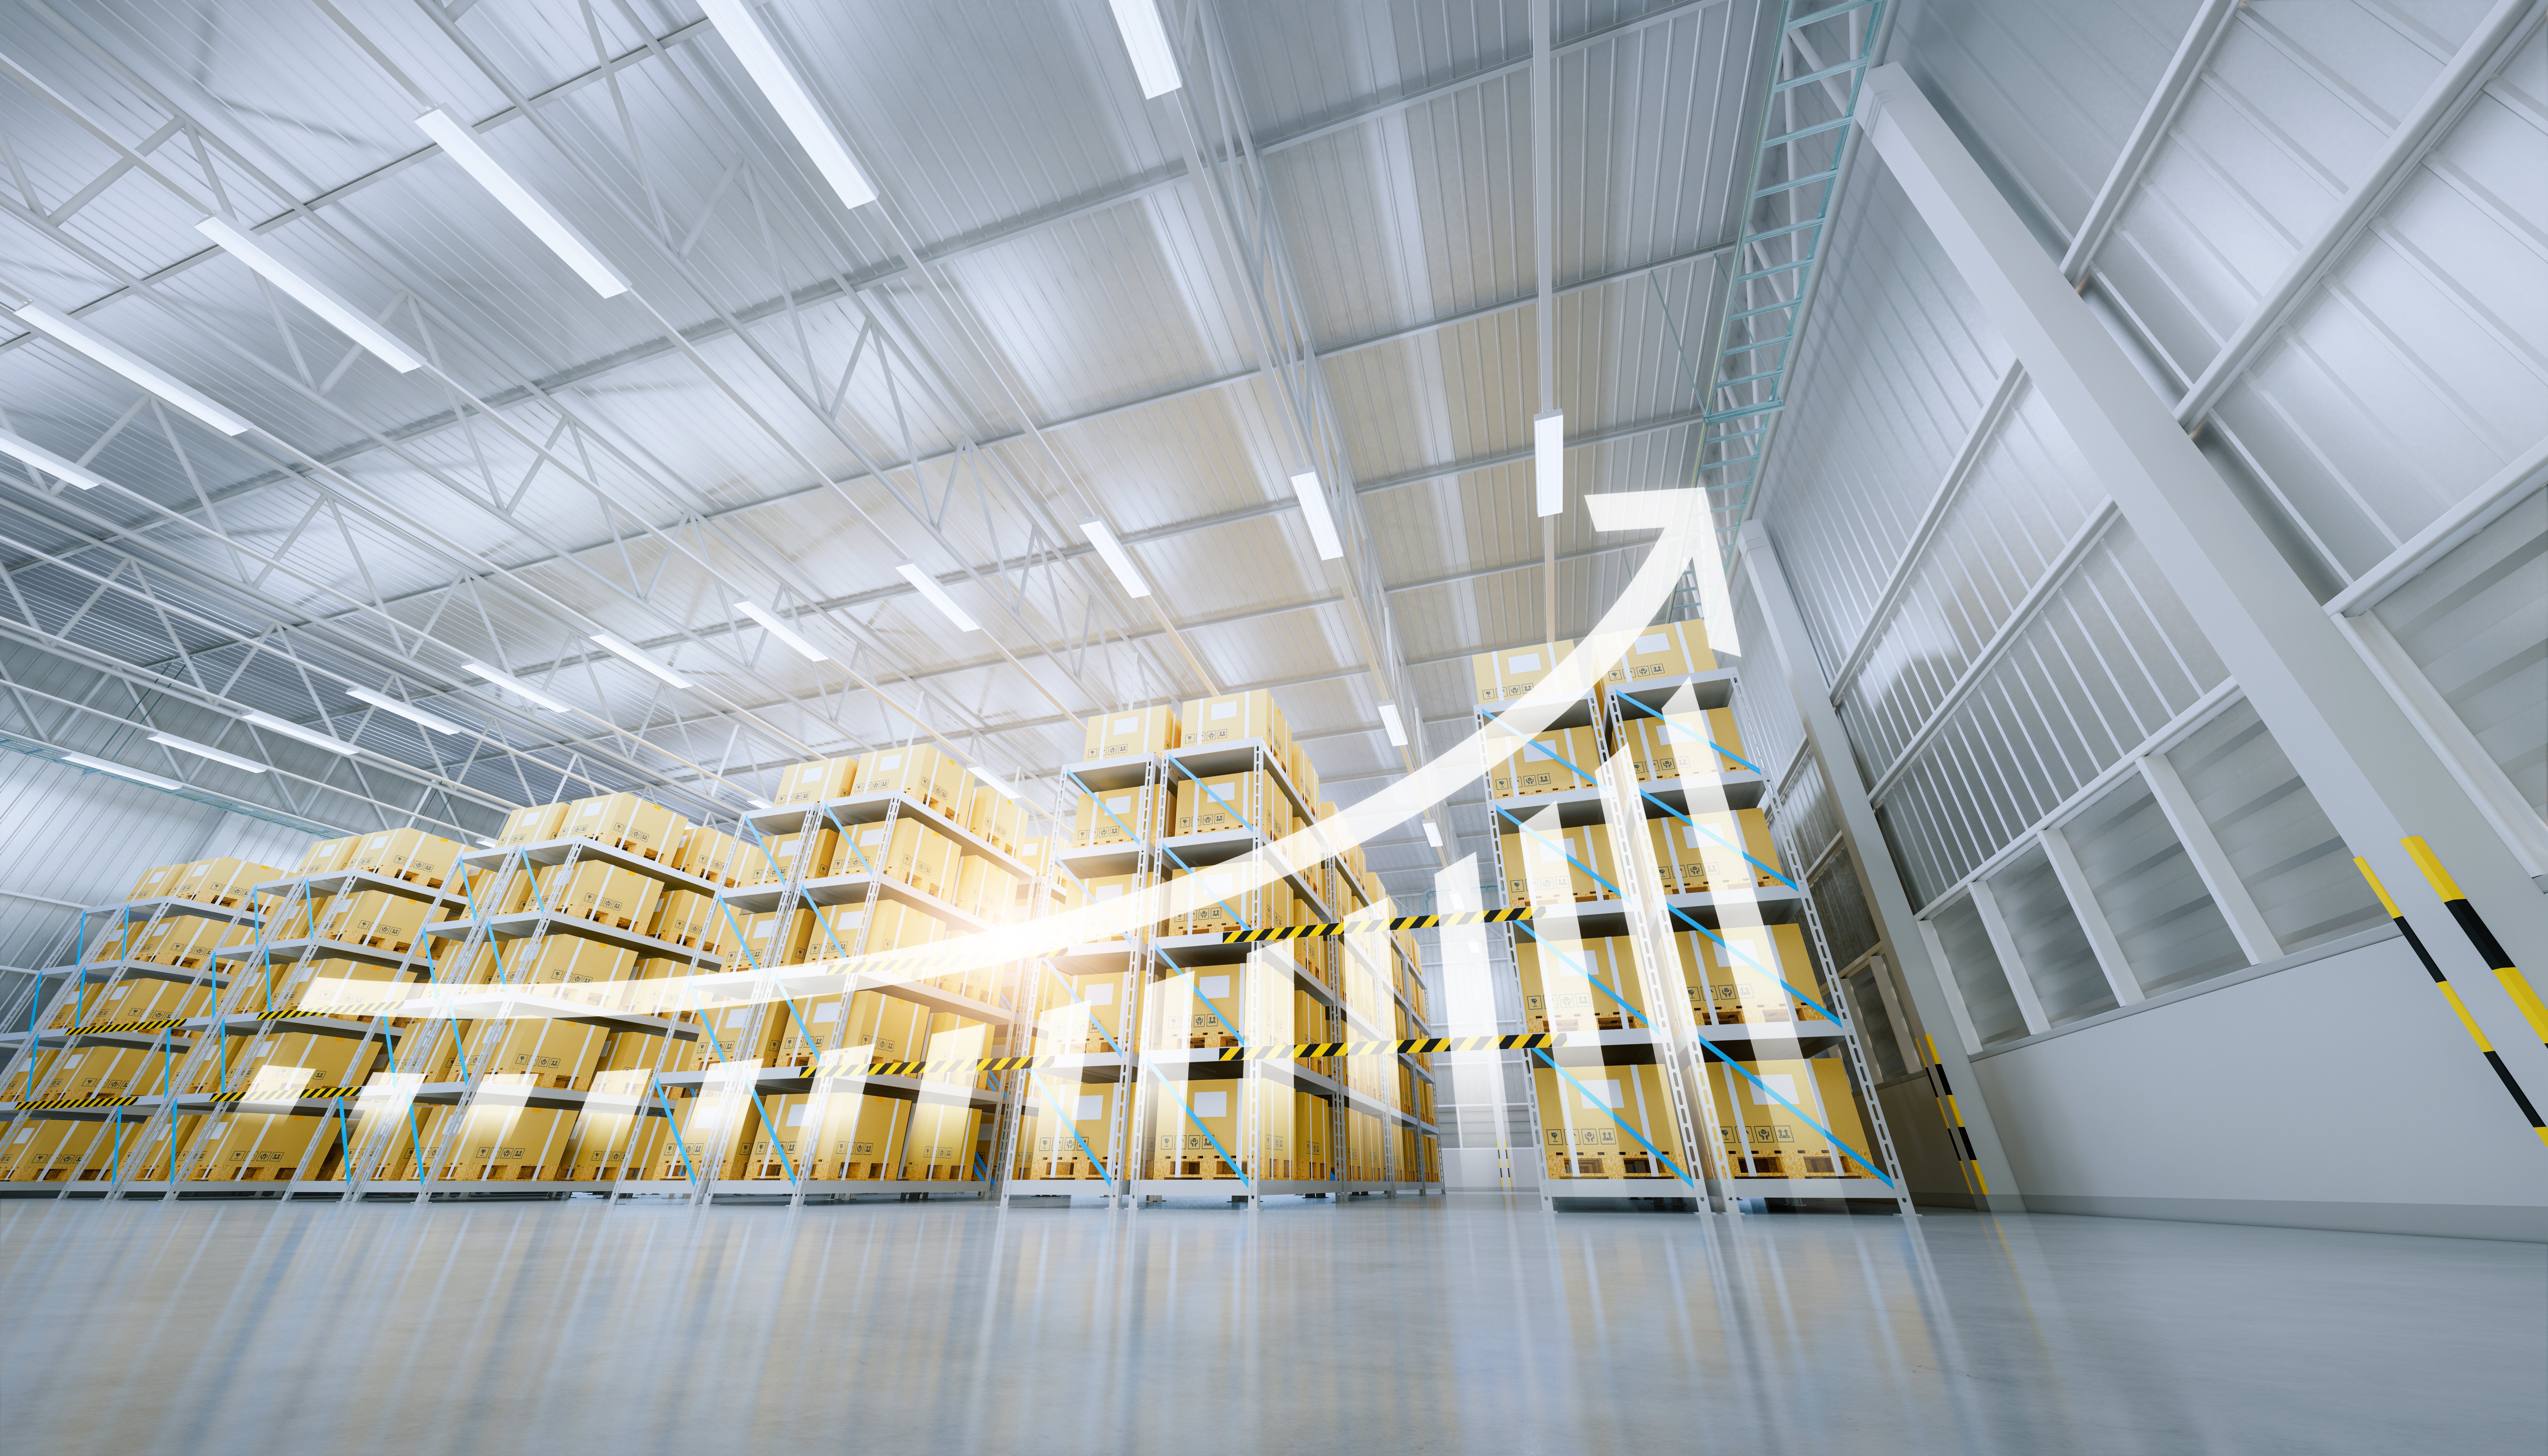 Strategies for Growth and Expansion in 3PL Warehousing